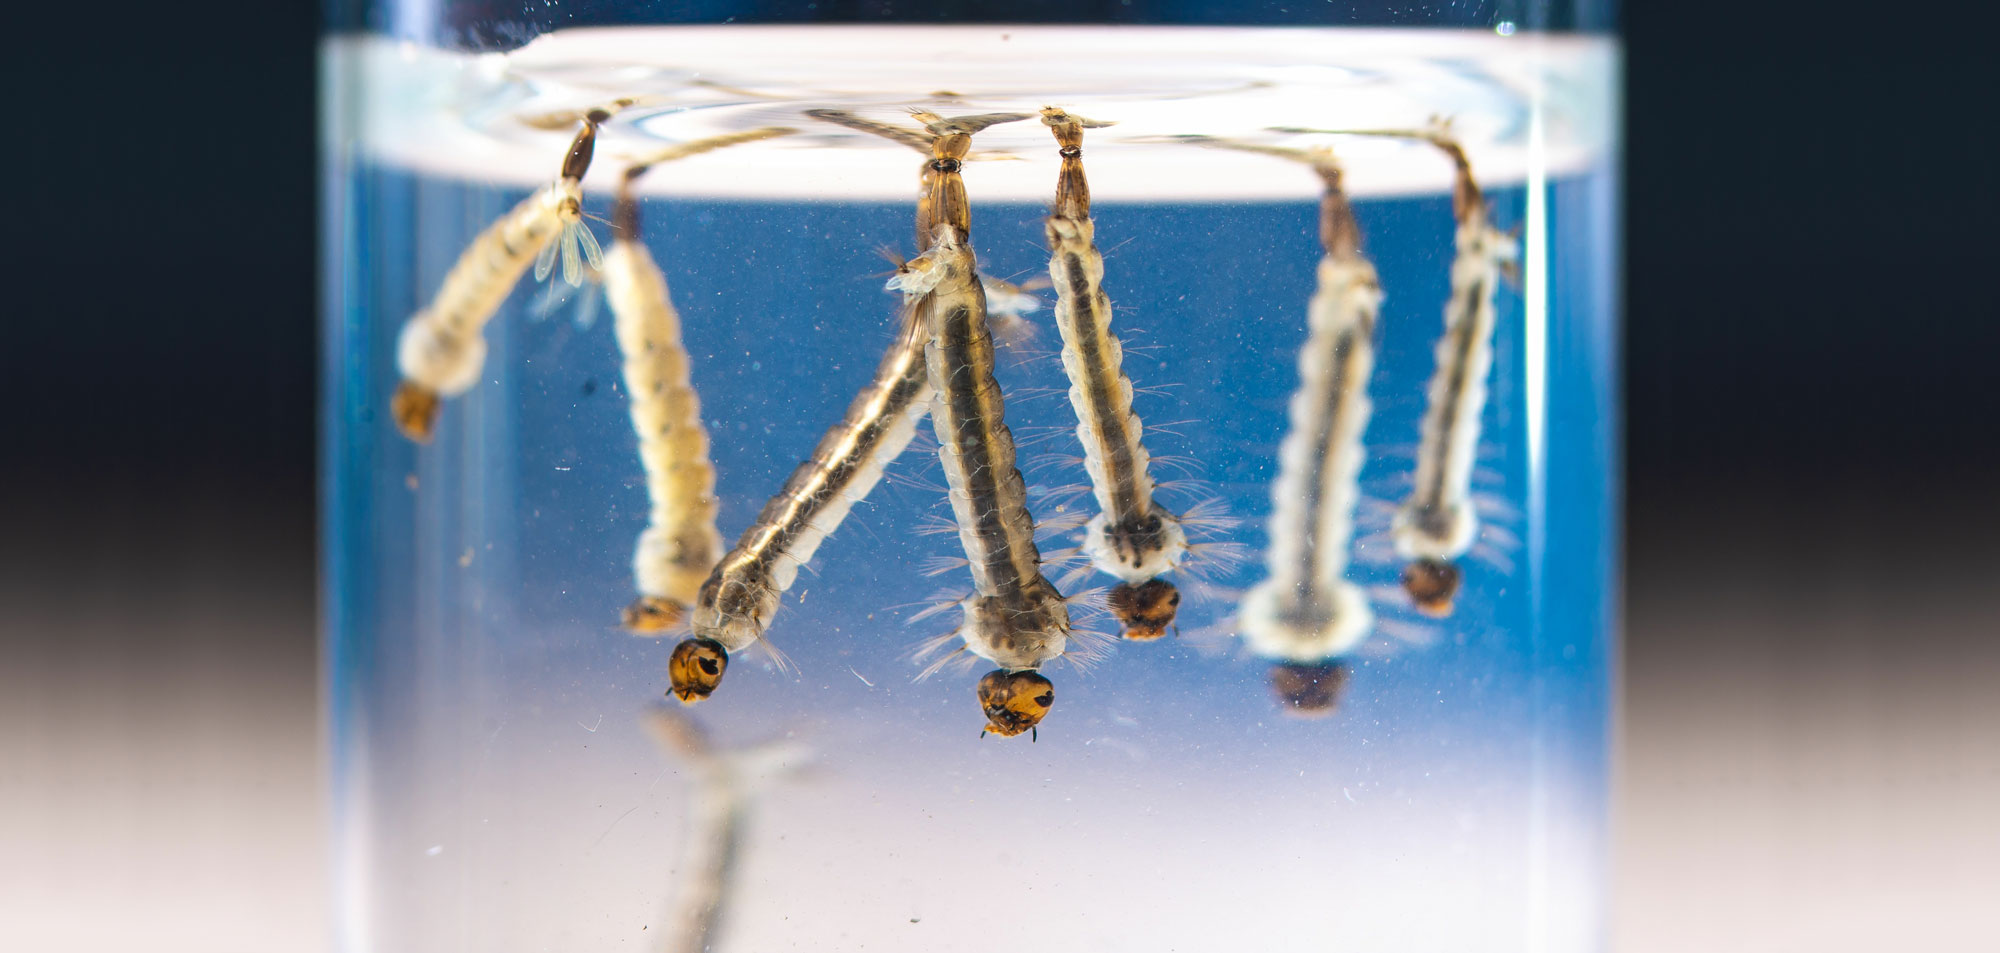 mosquito larvae suspended in water